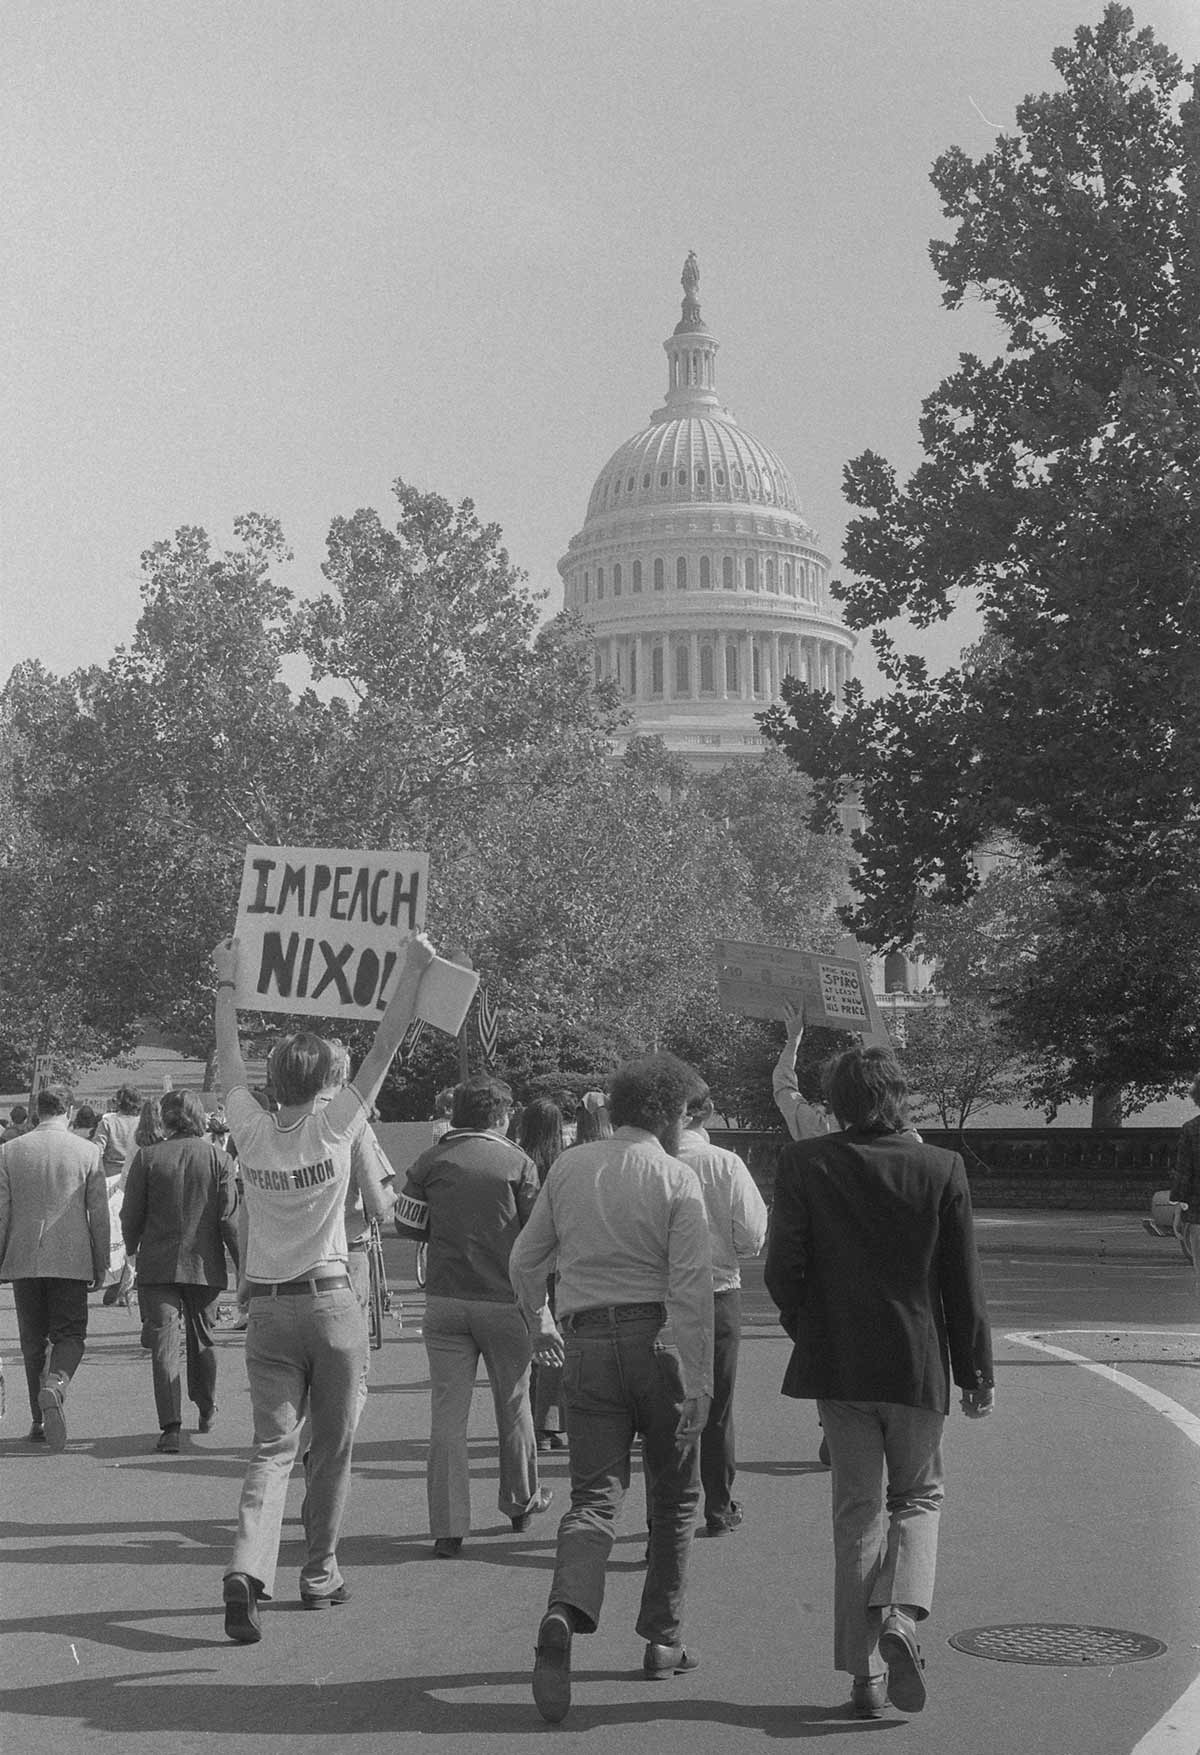 Demonstrators with “Impeach Nixon” sign near the U.S. Capitol, Washington, DC | Thomas O’Halloran and Marion S. Trikosko | Retrieved from the Library of Congress